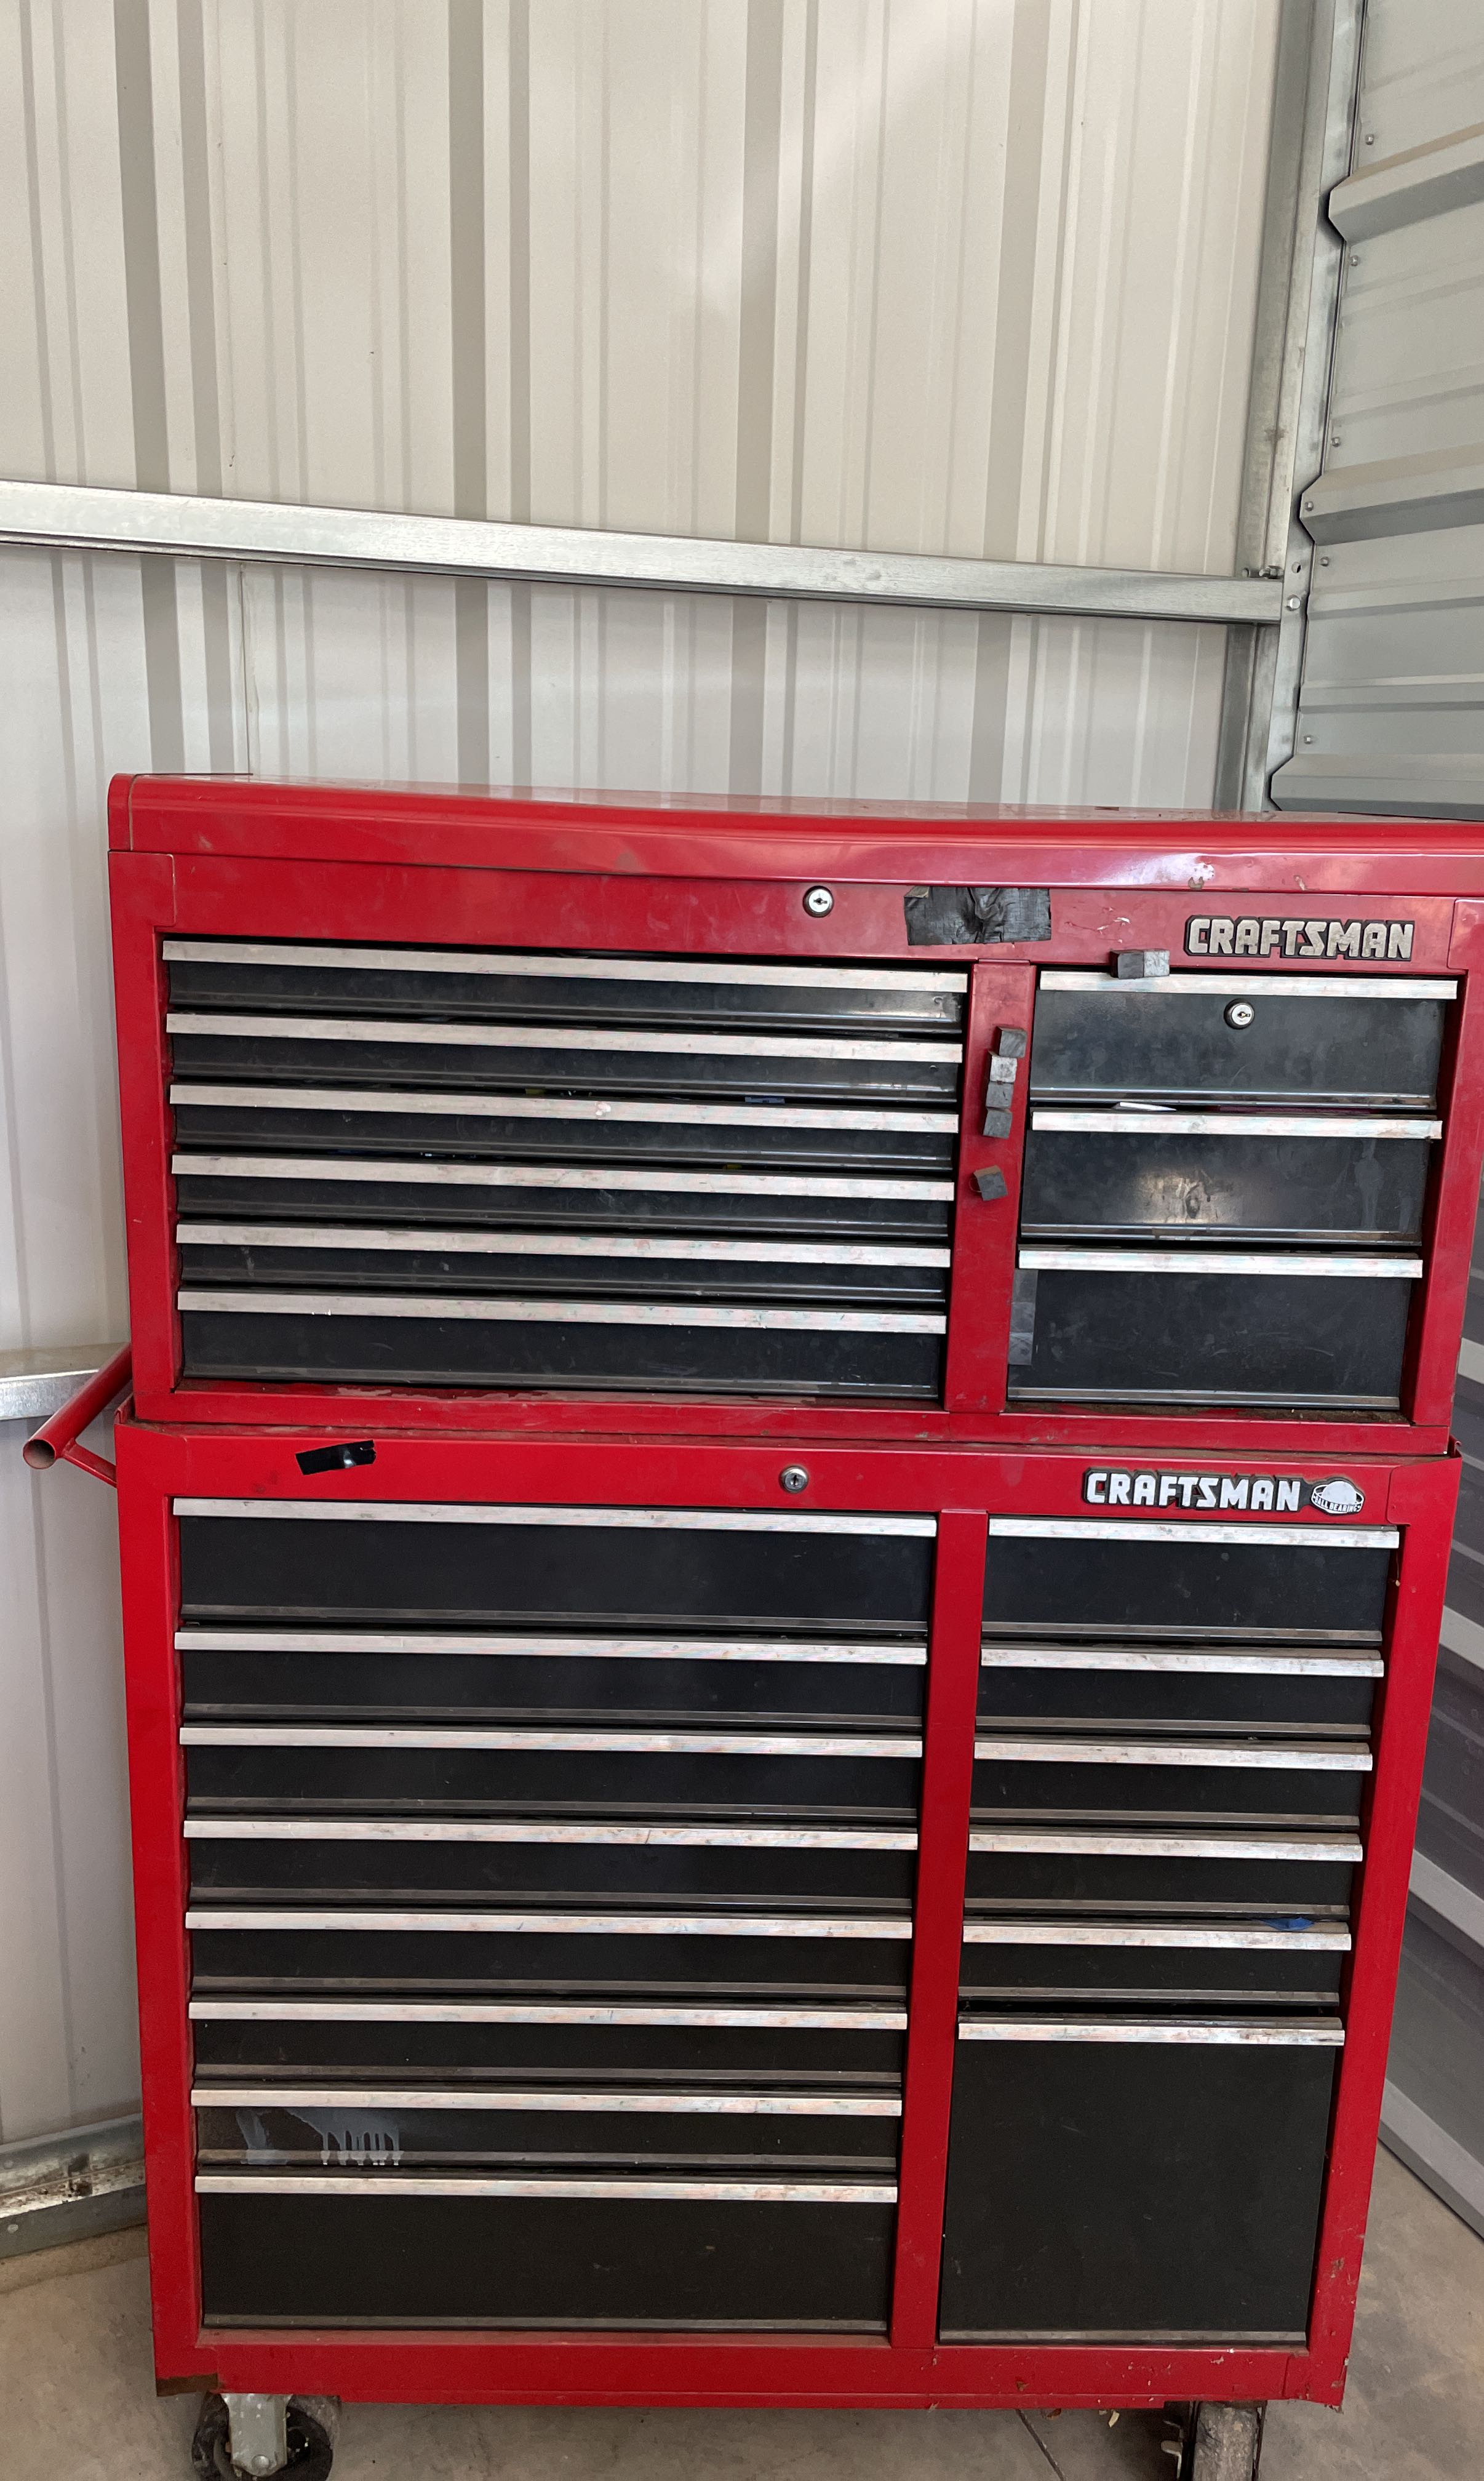 Craftsman Tool Chests for sale in Egypt, Texas